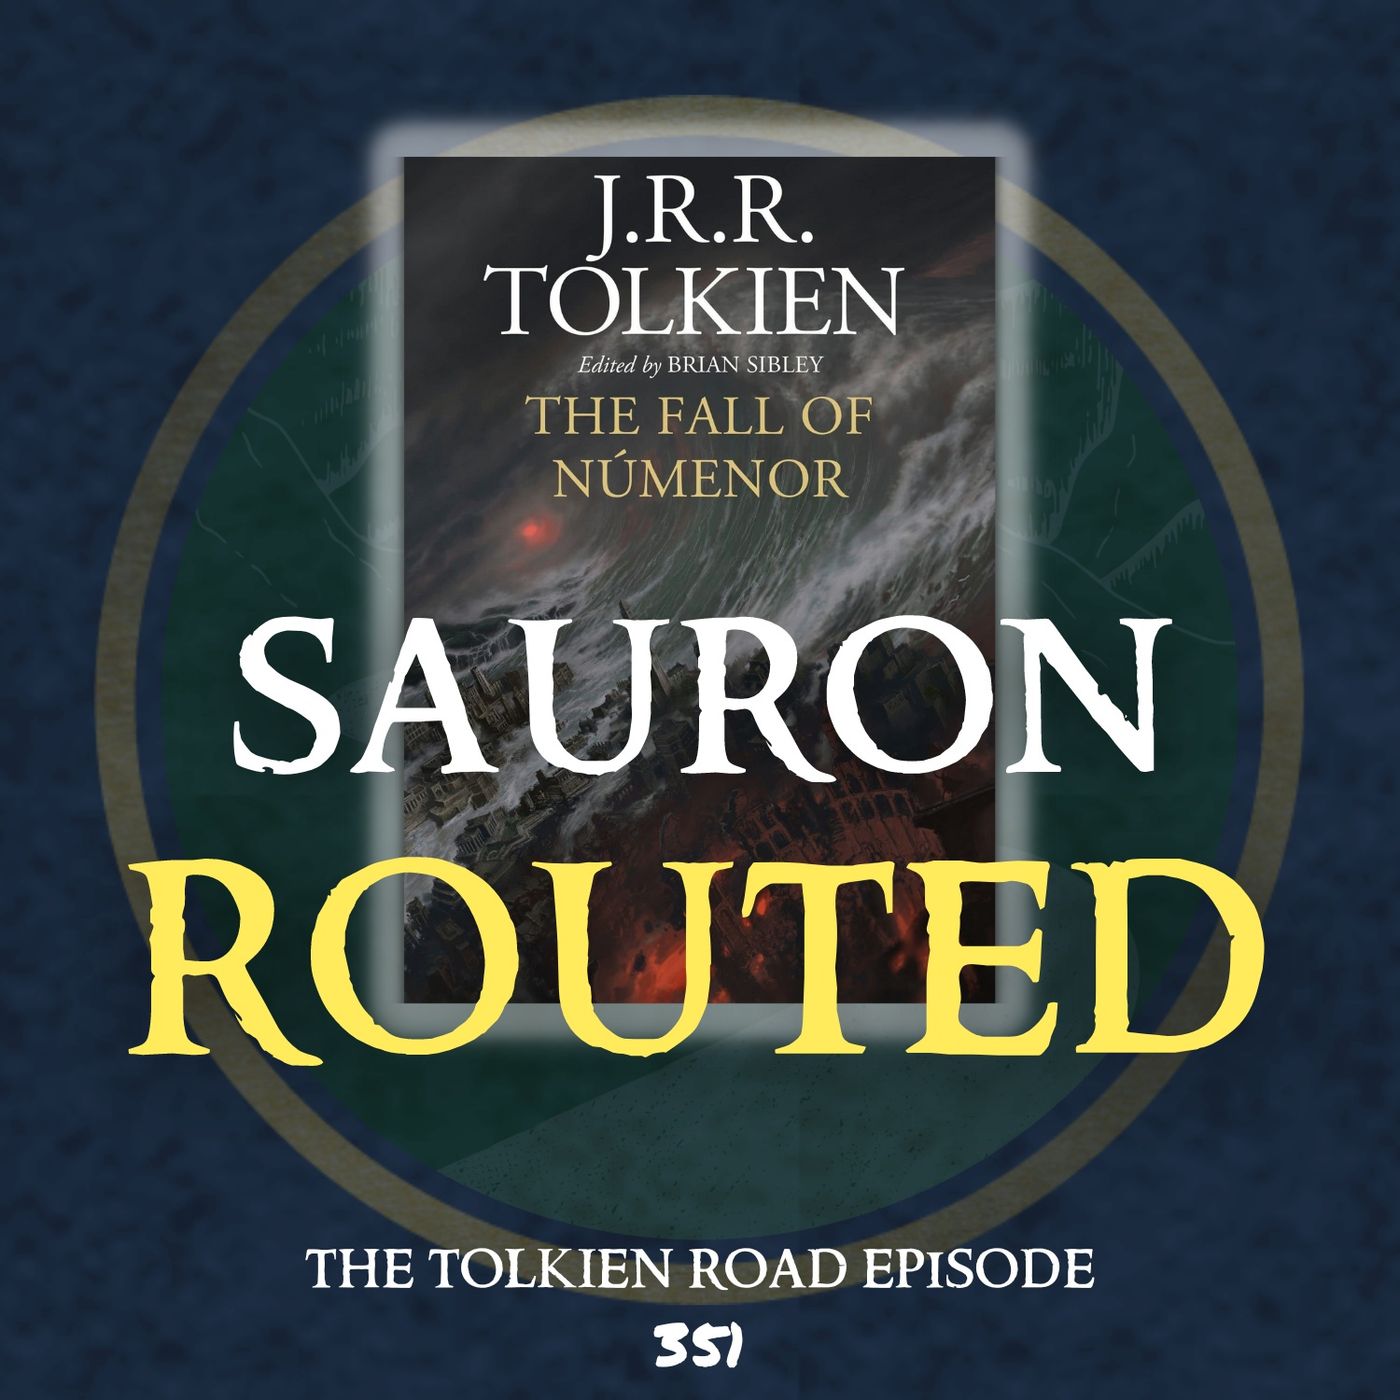 0351 » The Fall of Númenor Pt 26 » SA1701 » Sauron Routed and The First White Council